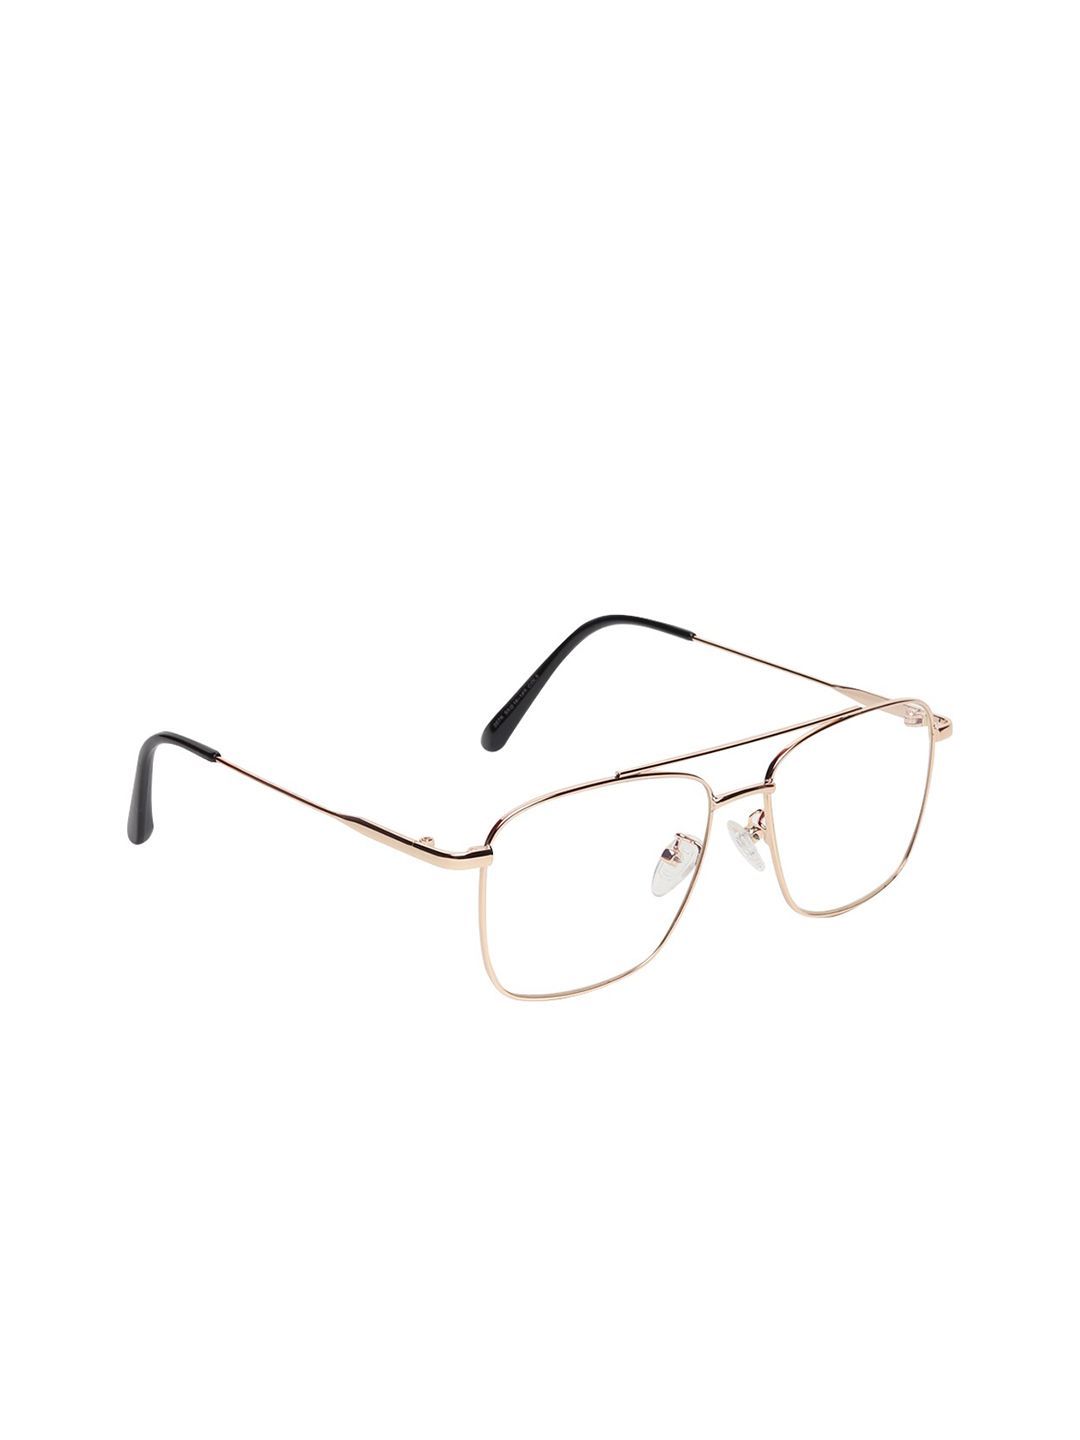 CRIBA Unisex Clear Lens & Gold-Toned Square Sunglasses with UV Protected Lens Price in India